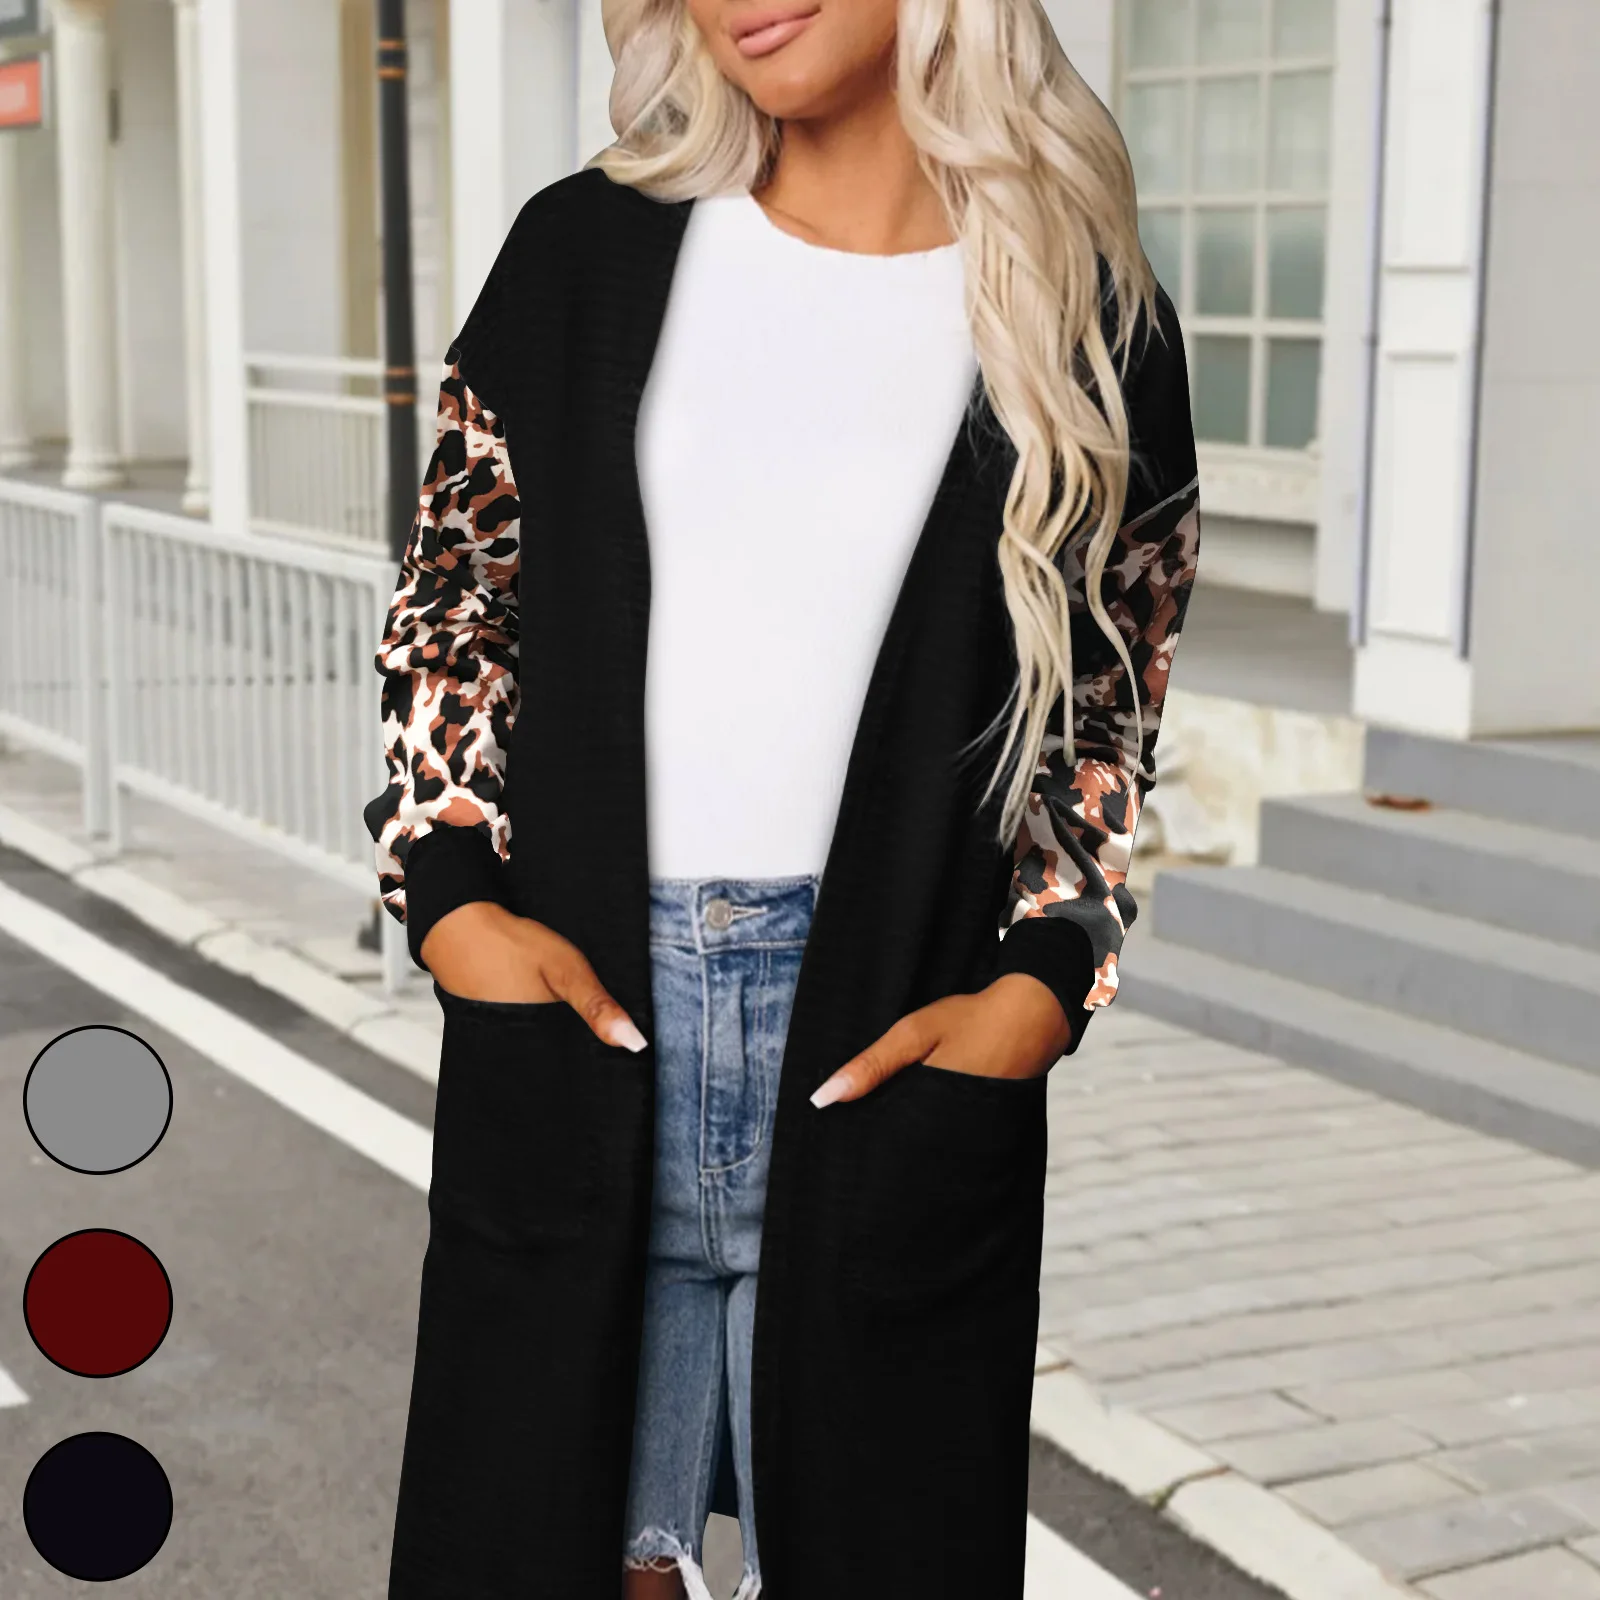 Spring and Autumn New Women's Top Splice Casual Loose Long Sleeve Cardigan Coat Fashion Female and Lady Long Coats Top